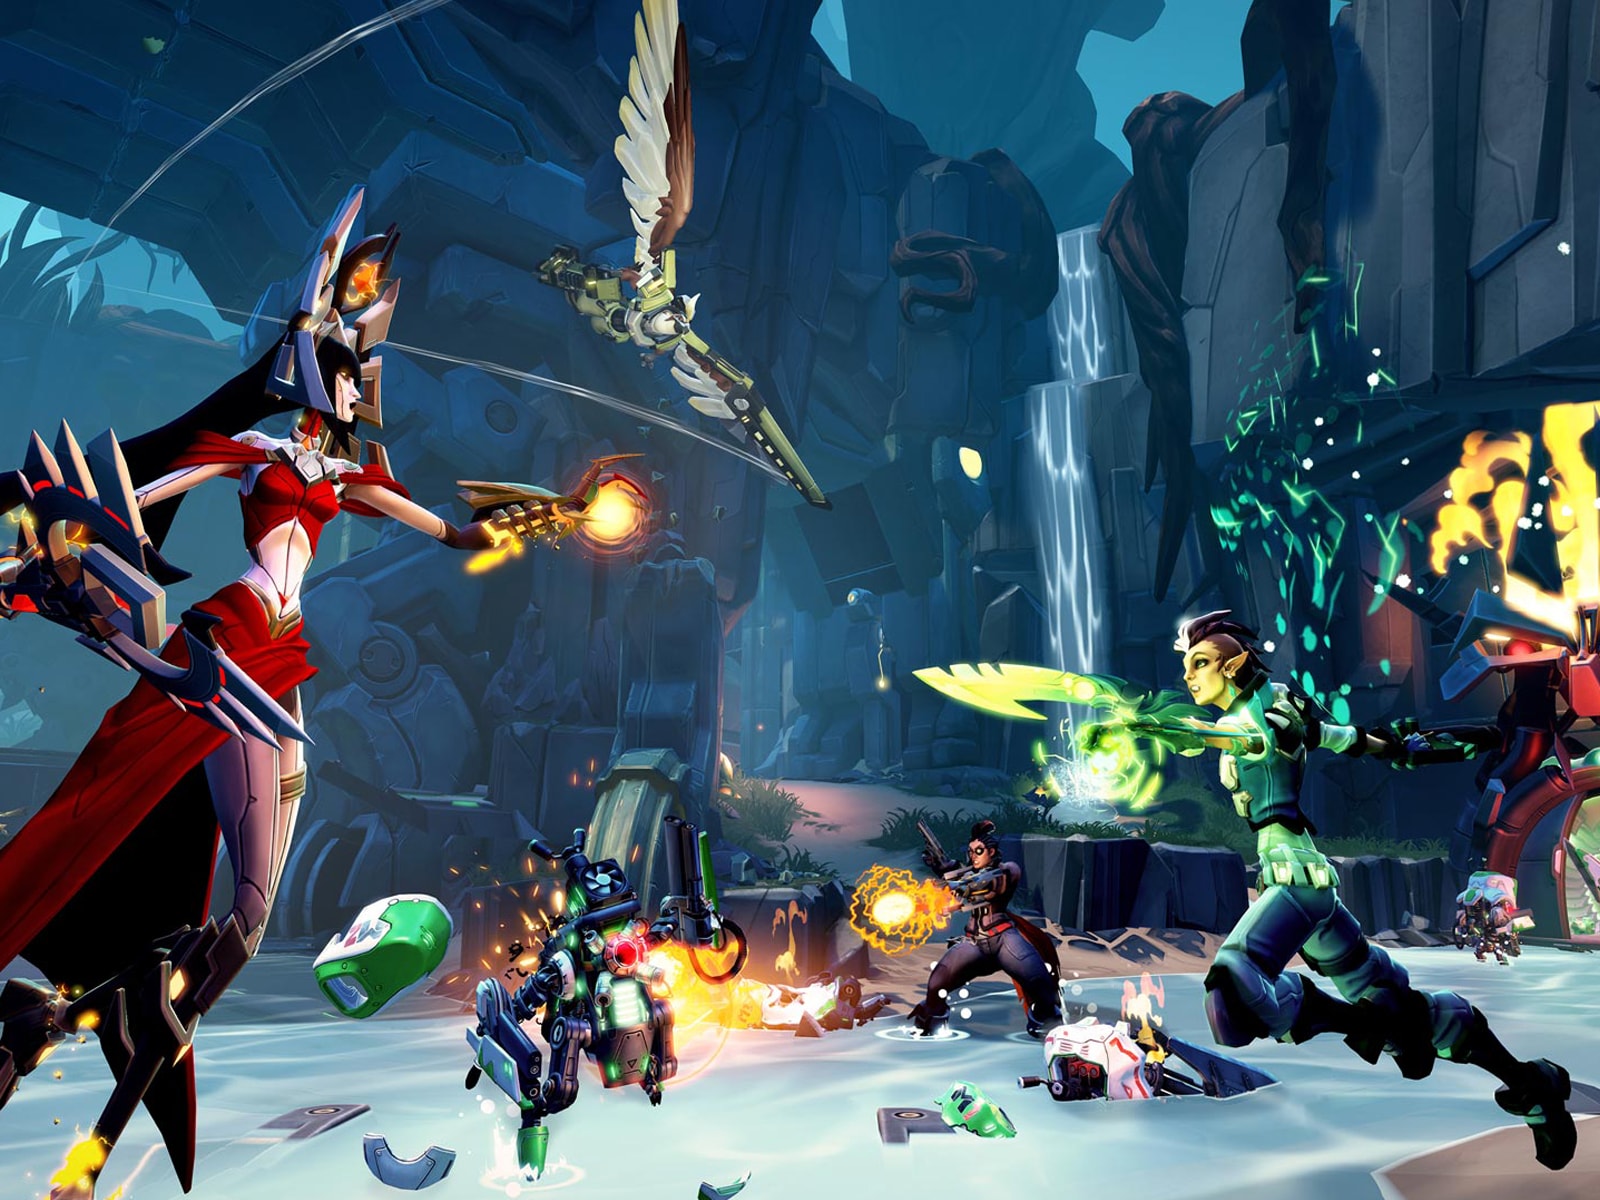 Screenshot of various colorful Battleborn characters competing in a cavern in meltdown mode